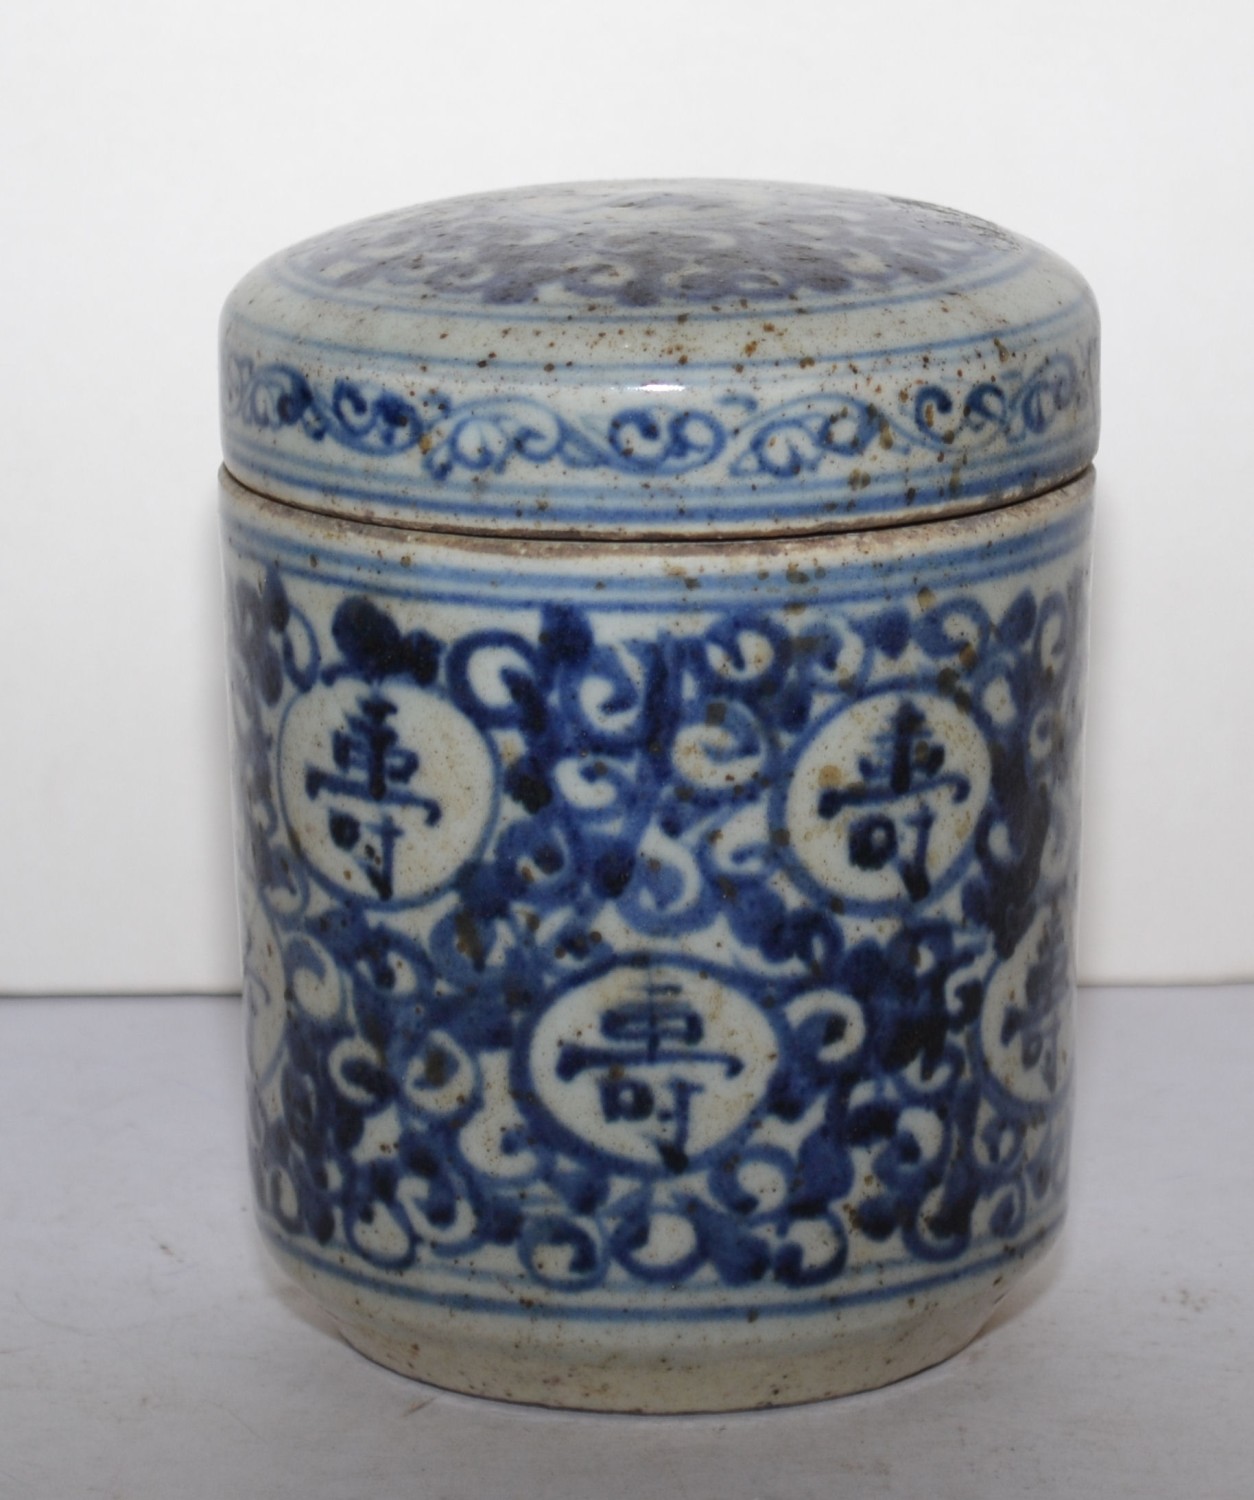 An Oriental Blue and White Lidded Pot with scroll and inscription decoration